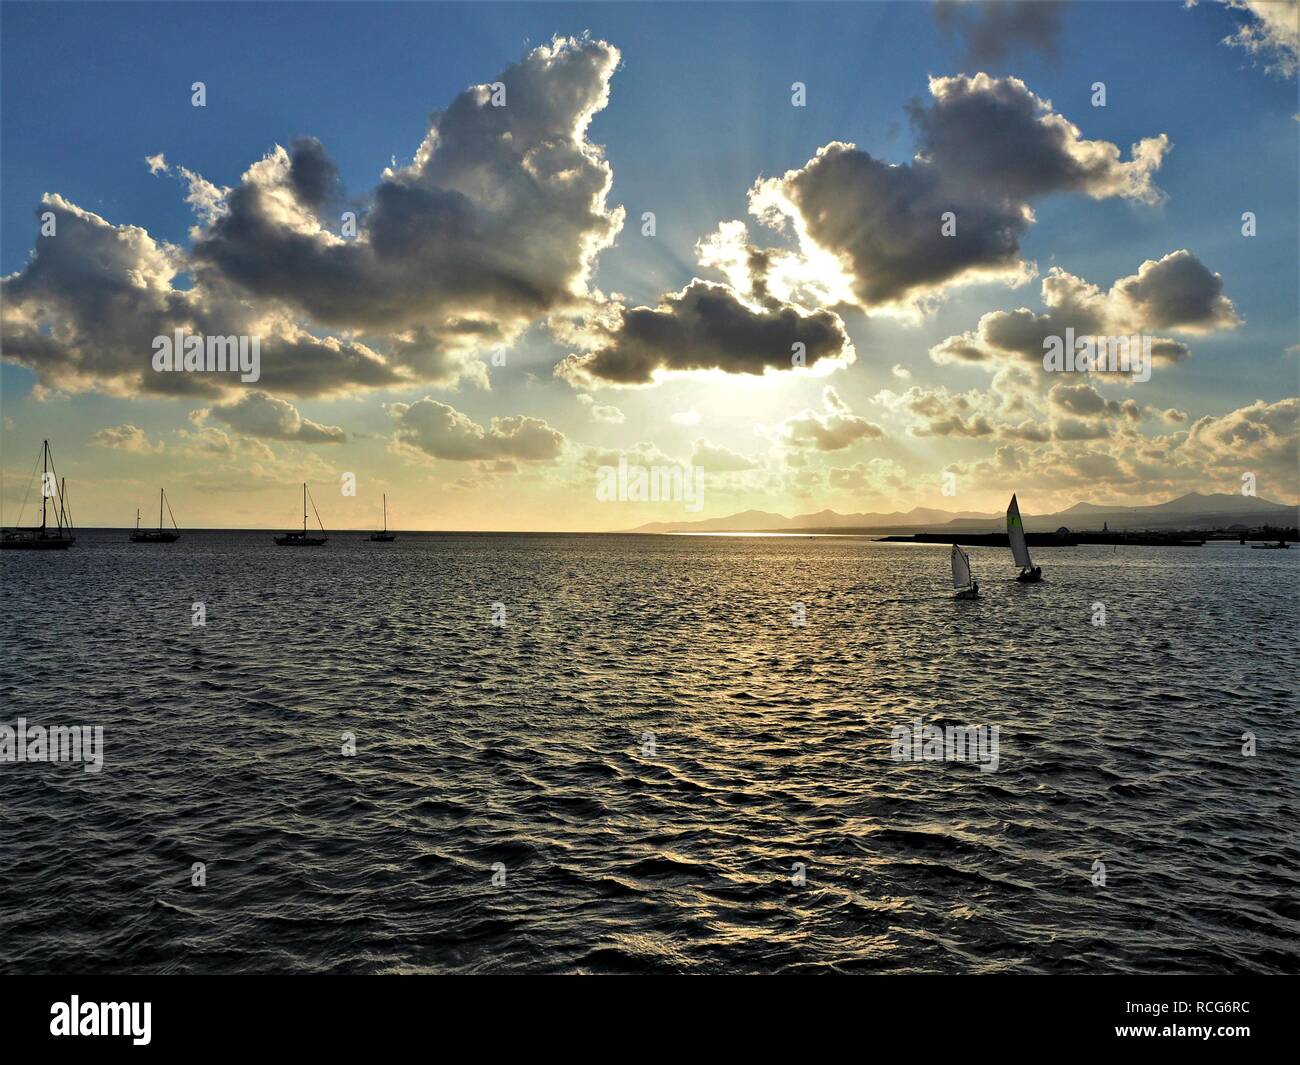 Beautiful sky just before sunset over sailing boats on the ocean at Arrecife, Lanzarote, Canary Islands Stock Photo